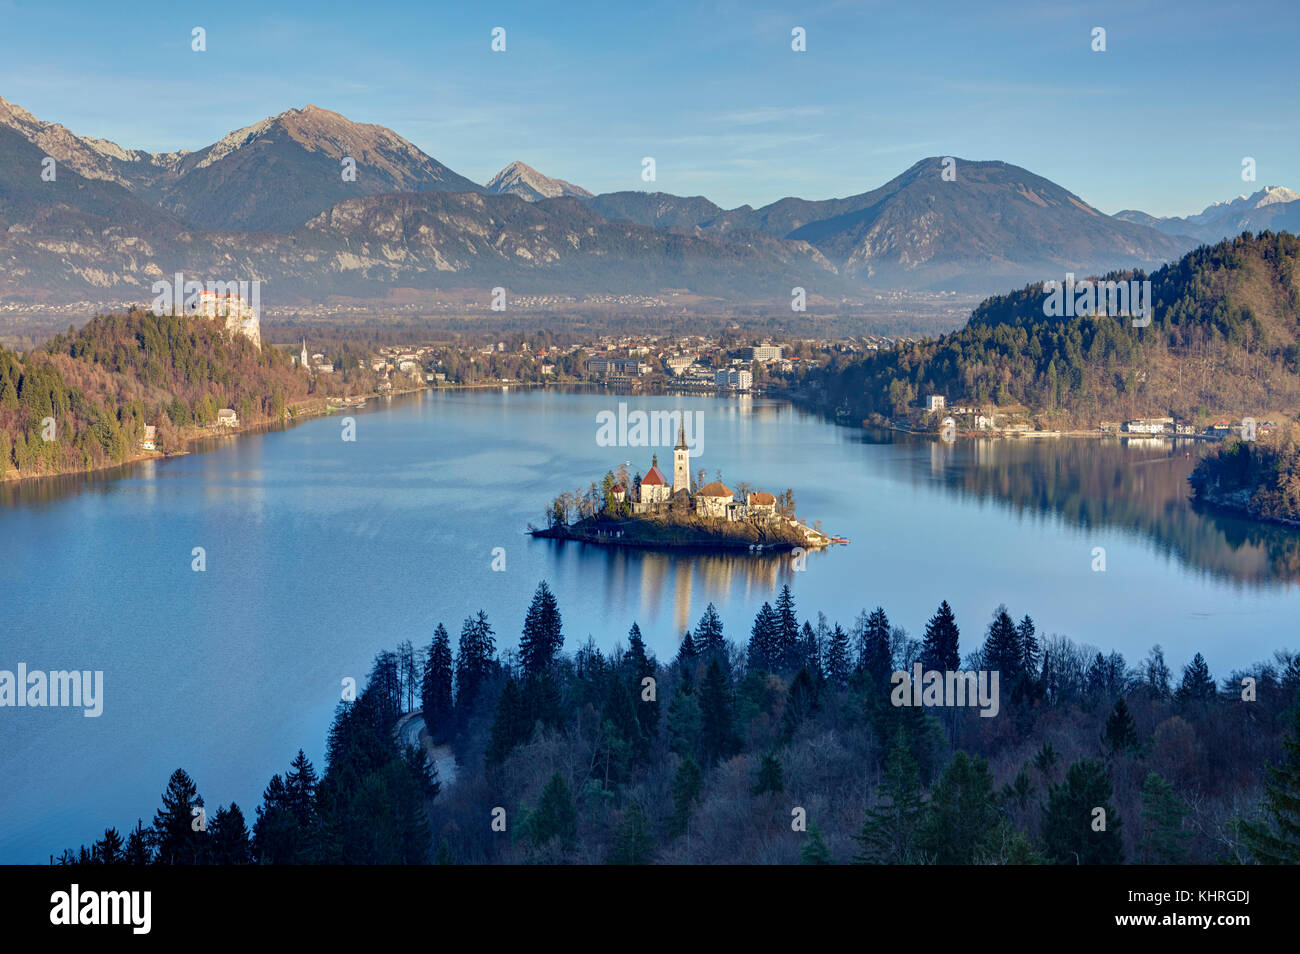 Elevated view of Lake Bled and the Church of Mary the Queen, located on a small island in the middle of the lake, Bled, Slovenia Stock Photo